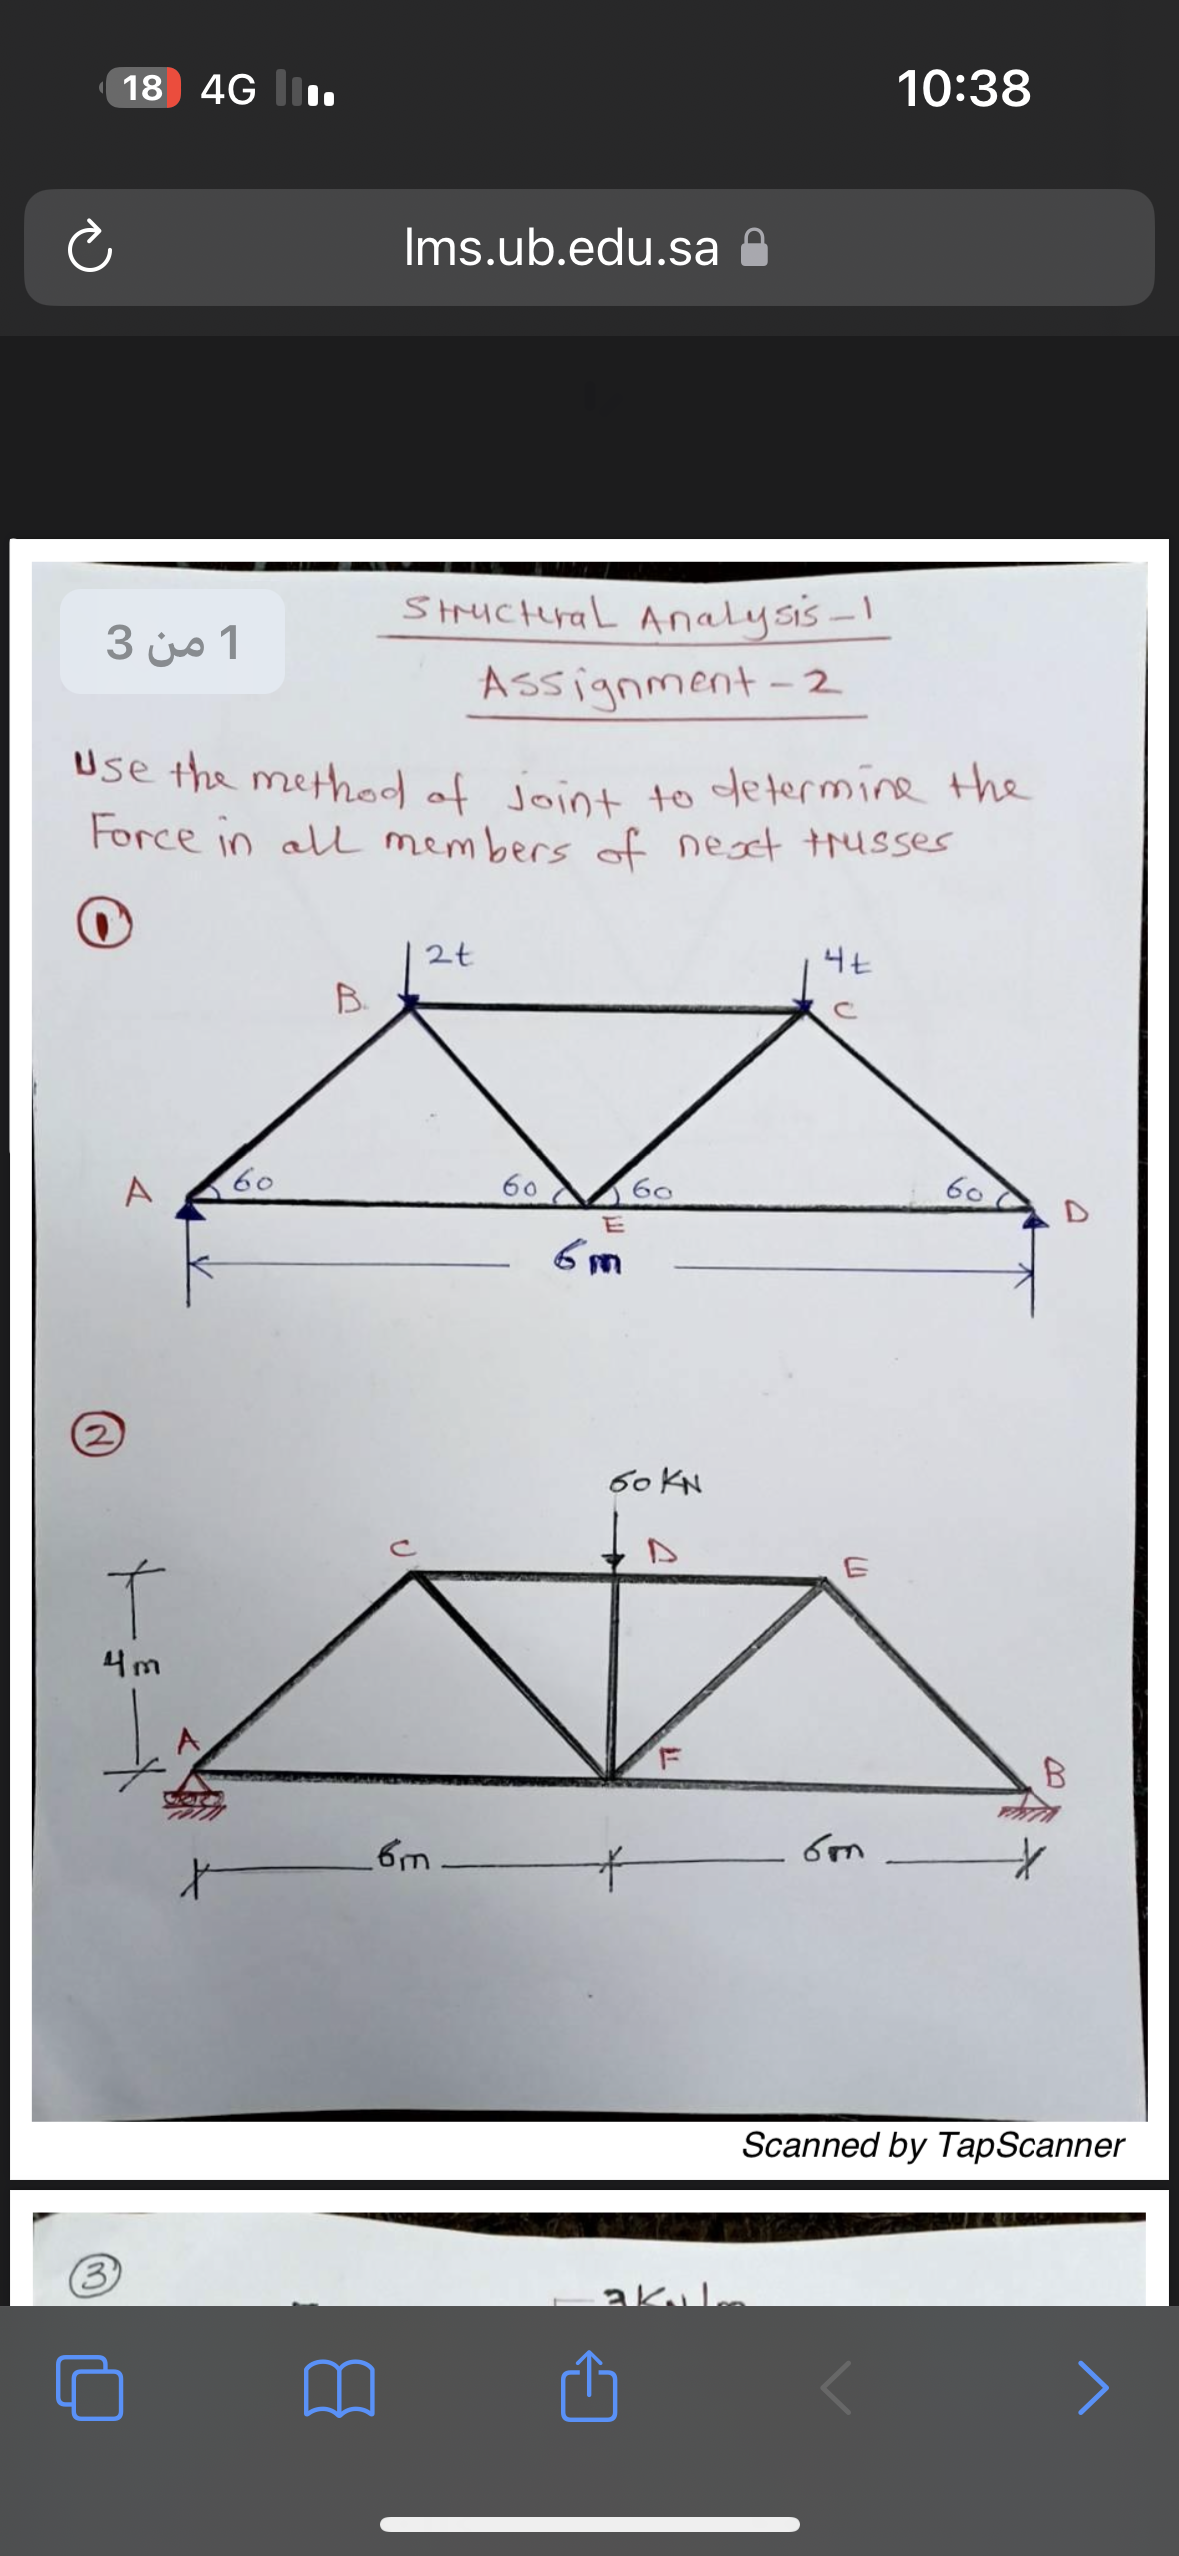 (2
18 4G III.
Structural Analysis - 1
Assignment-2
Use the method of joint to determine the
Force in all members of next trusses
3
1 من 3
T
4m
60
Ims.ub.edu.sa
B.
2t
6m
60
60
E
6m
боки
akule
₁
4Ł
10:38
117
60
B
*
Scanned by TapScanner